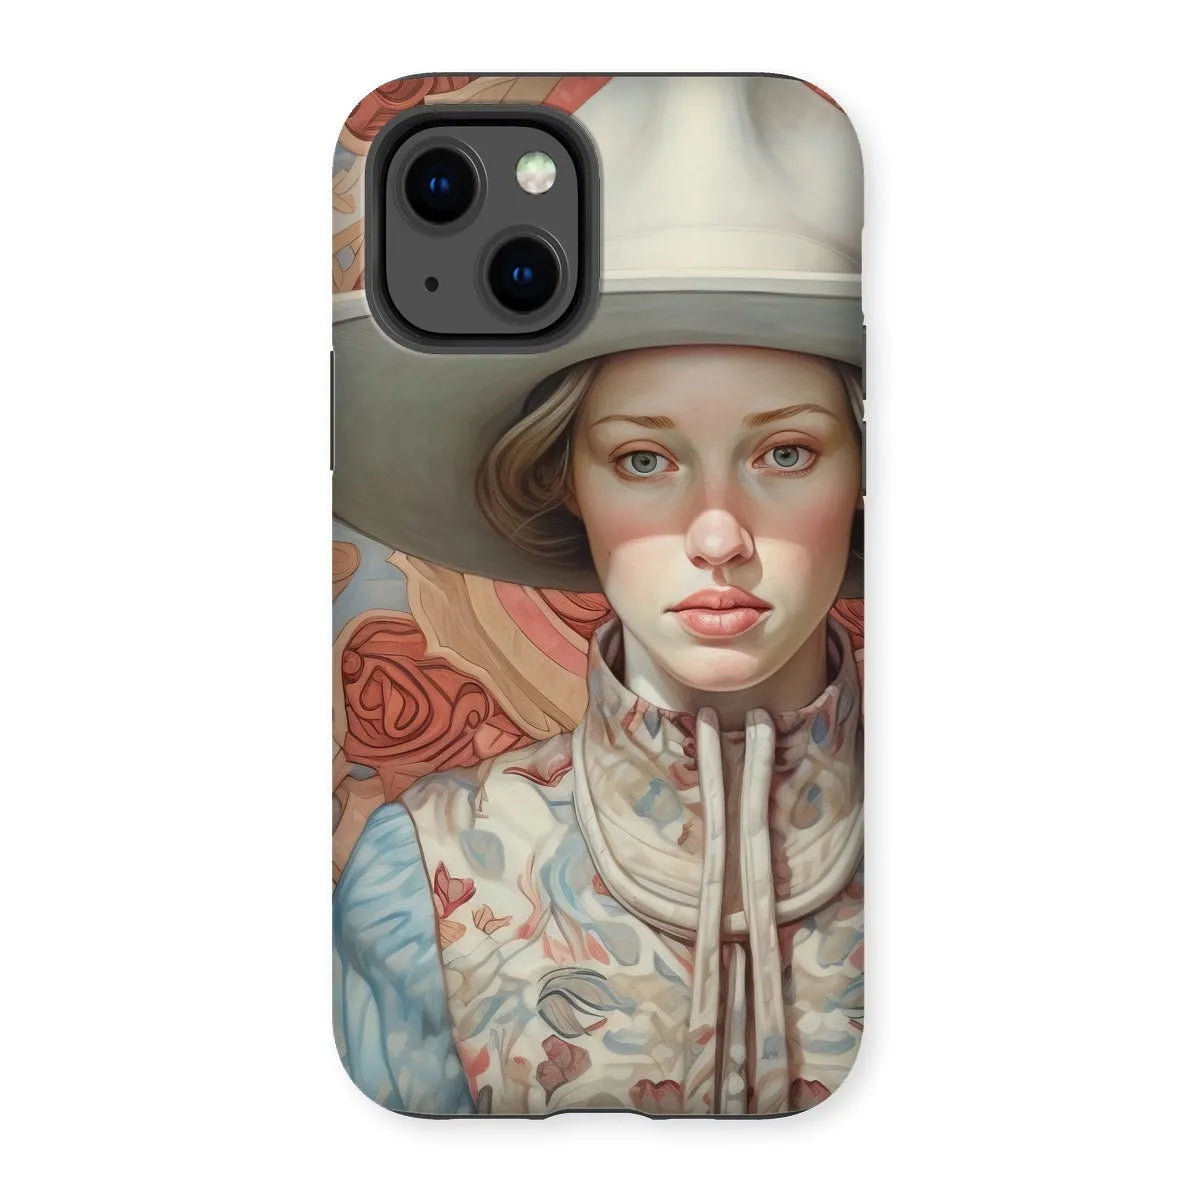 Lottie The Lesbian Cowgirl - Sapphic Art Phone Case - Iphone 13 / Matte - Mobile Phone Cases - Aesthetic Art